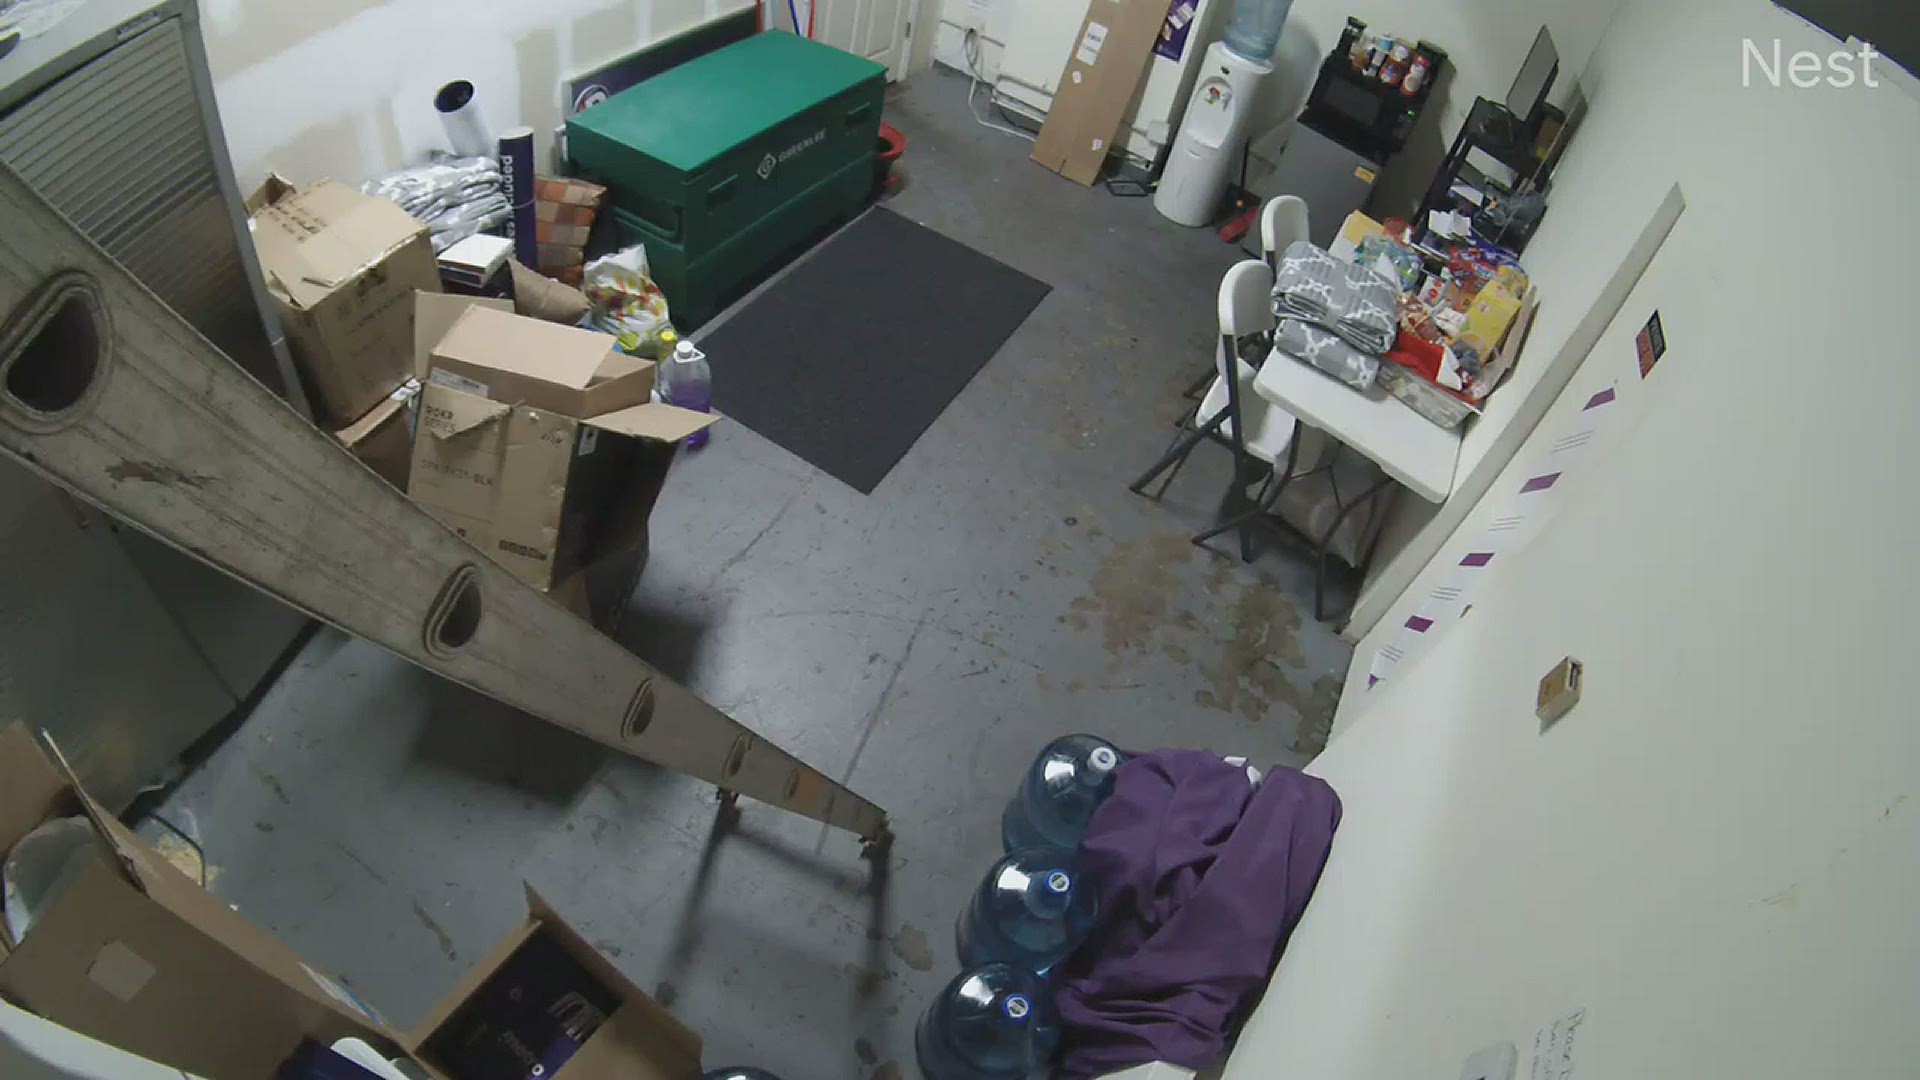 This video shows three of the looters going through the back room of the store.